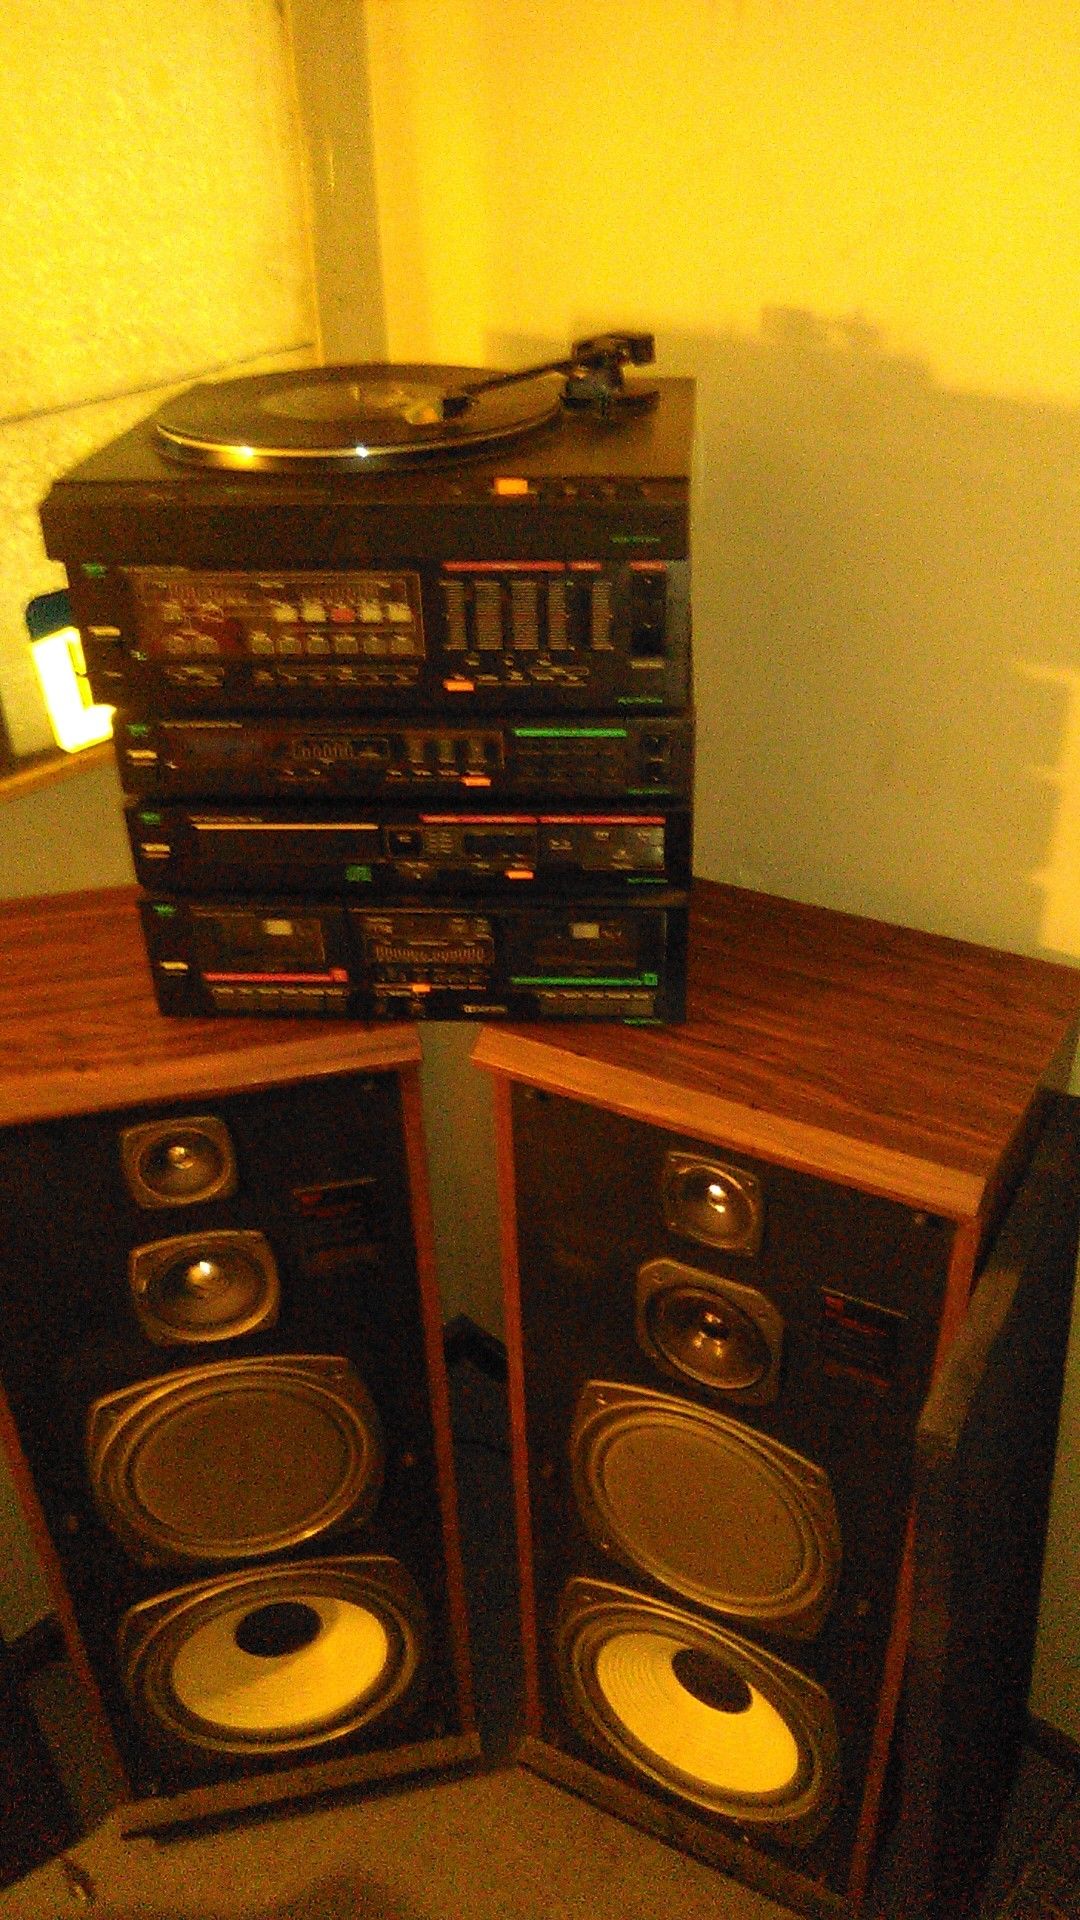 MCs series amp, tuner, turntable, CD, and tape stereo system with speakers